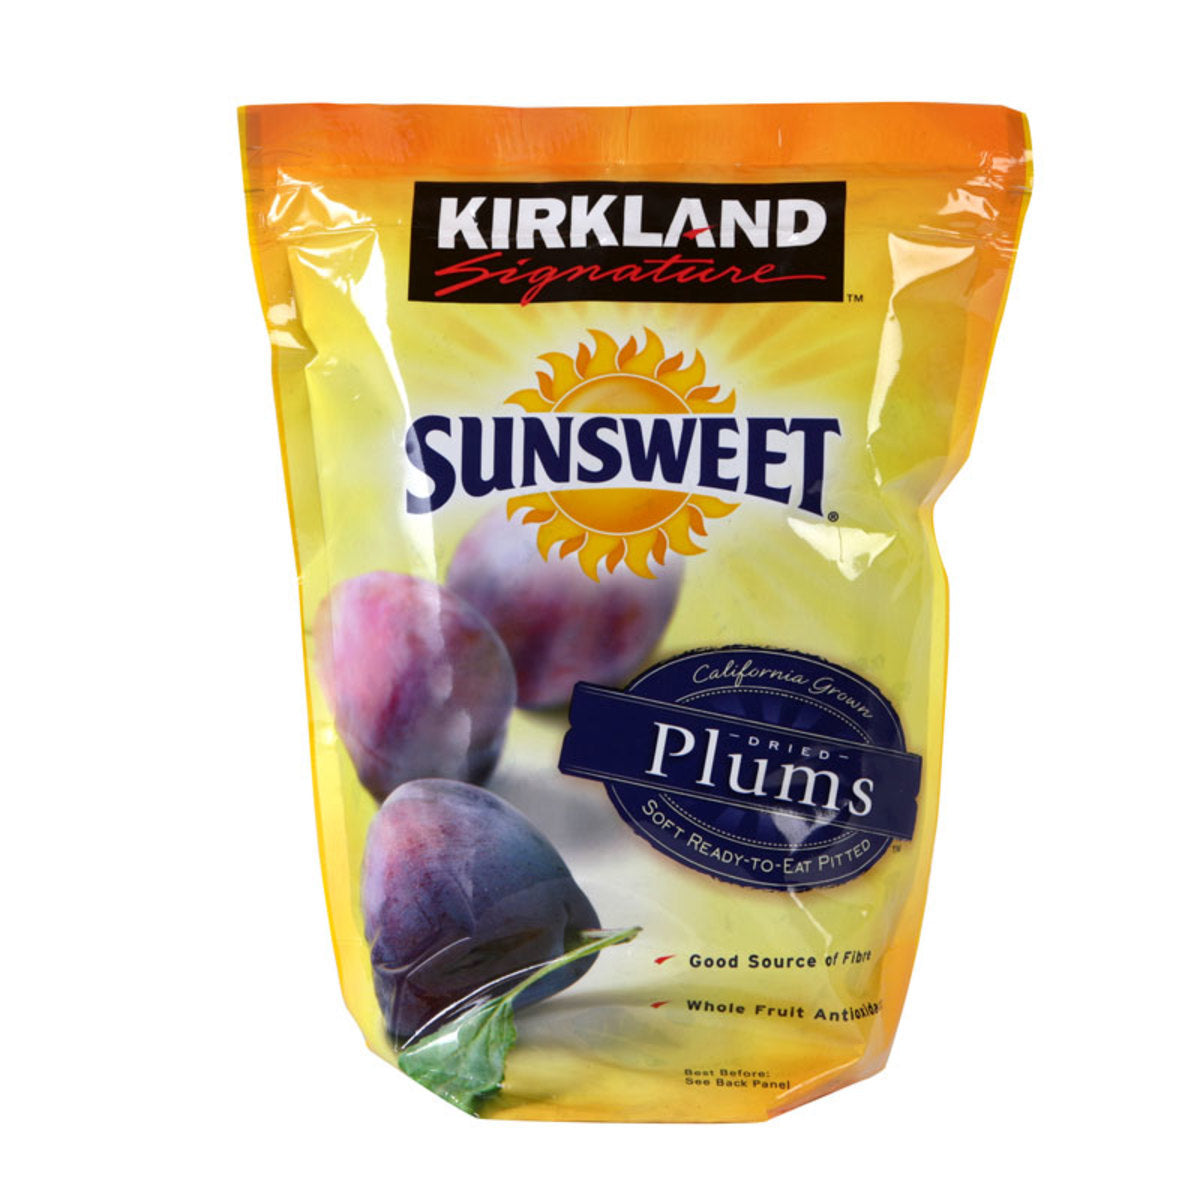 Kirkland Signature Sunsweet Pitted Dried Plums, 1.59kg - McGrocer